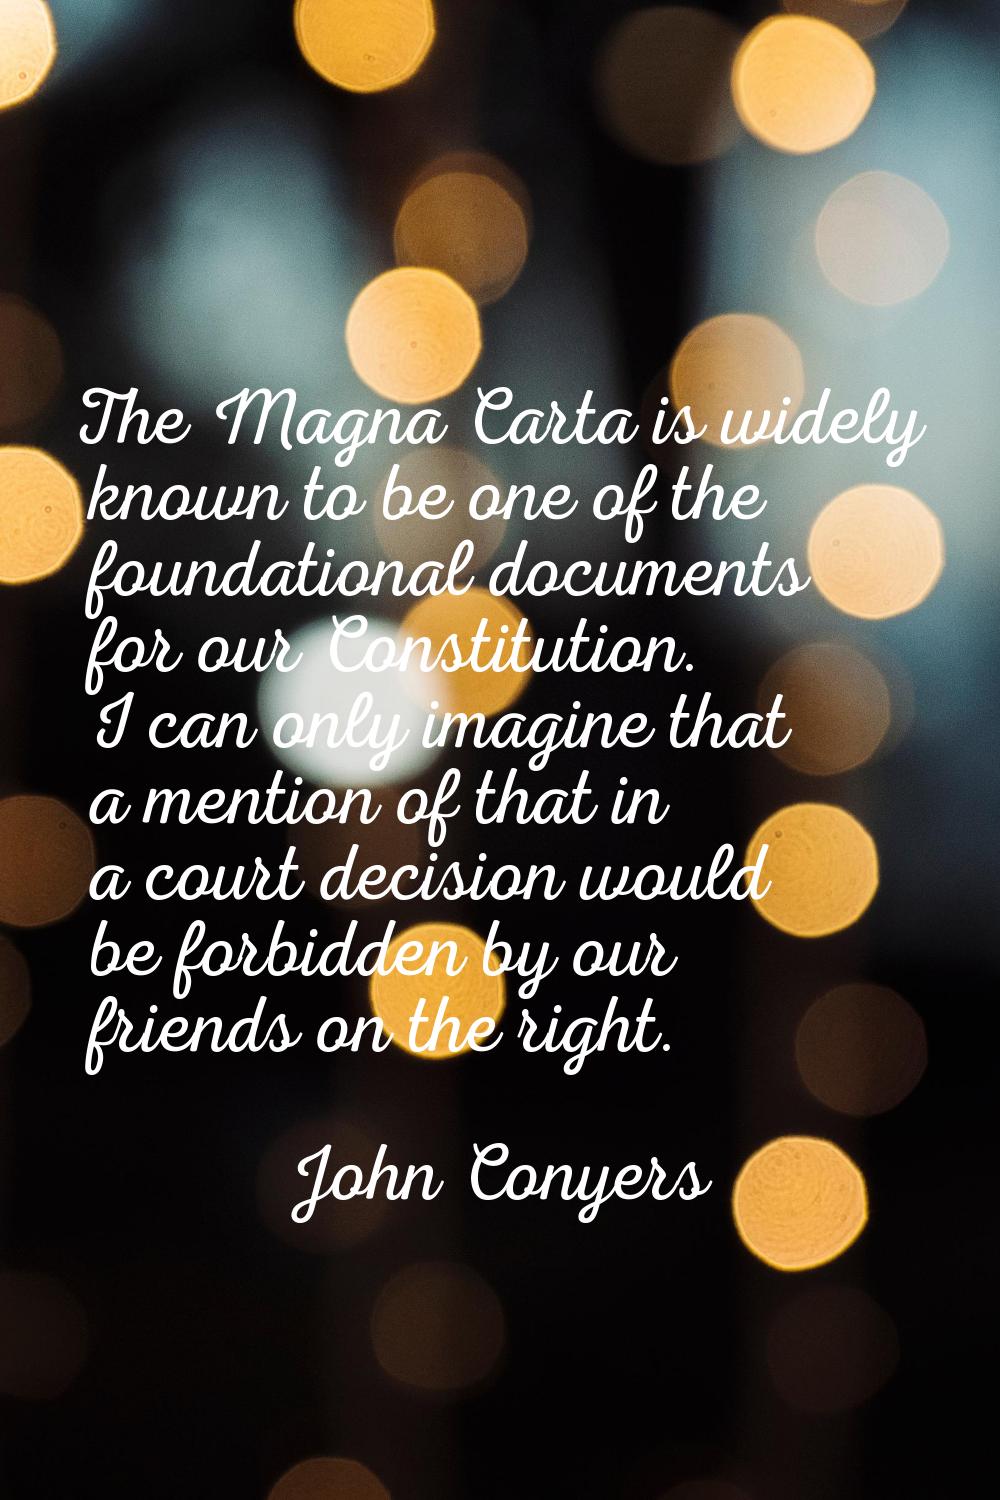 The Magna Carta is widely known to be one of the foundational documents for our Constitution. I can